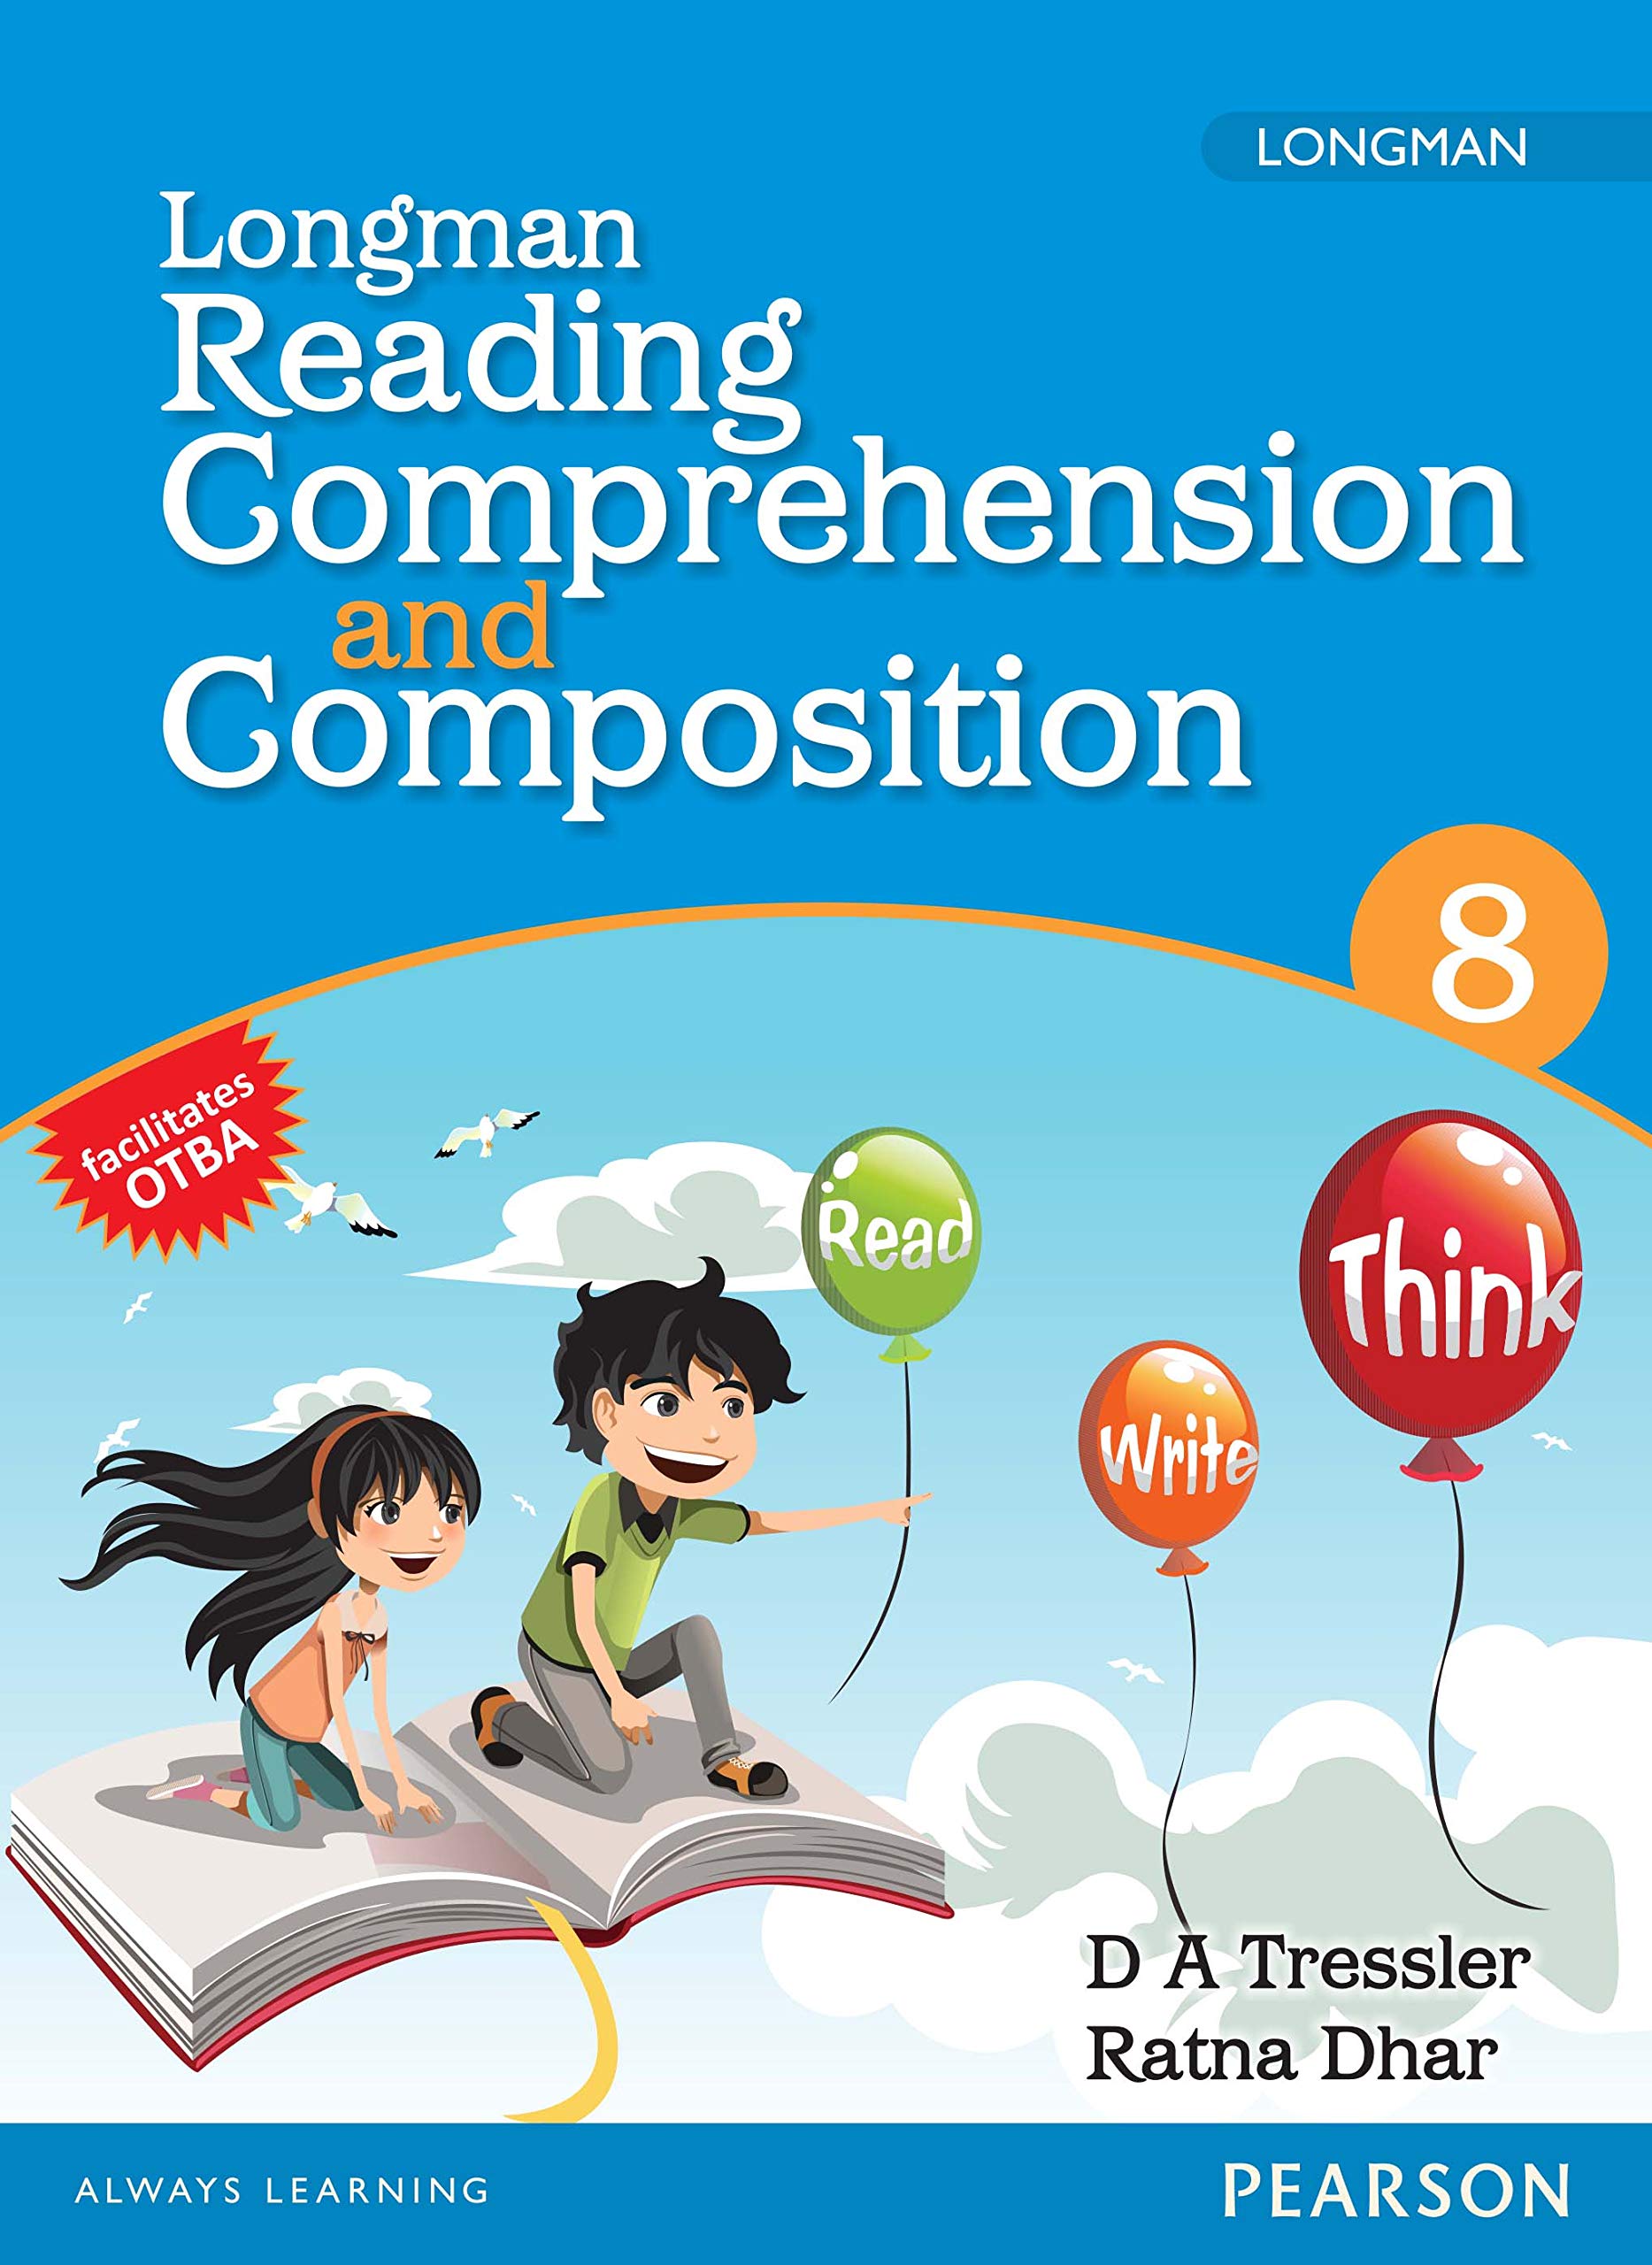 Pearson　Comprehension　Class　Composition　for　Textbook　Longman　And　Reading　Malik　Booksellers　Stationers